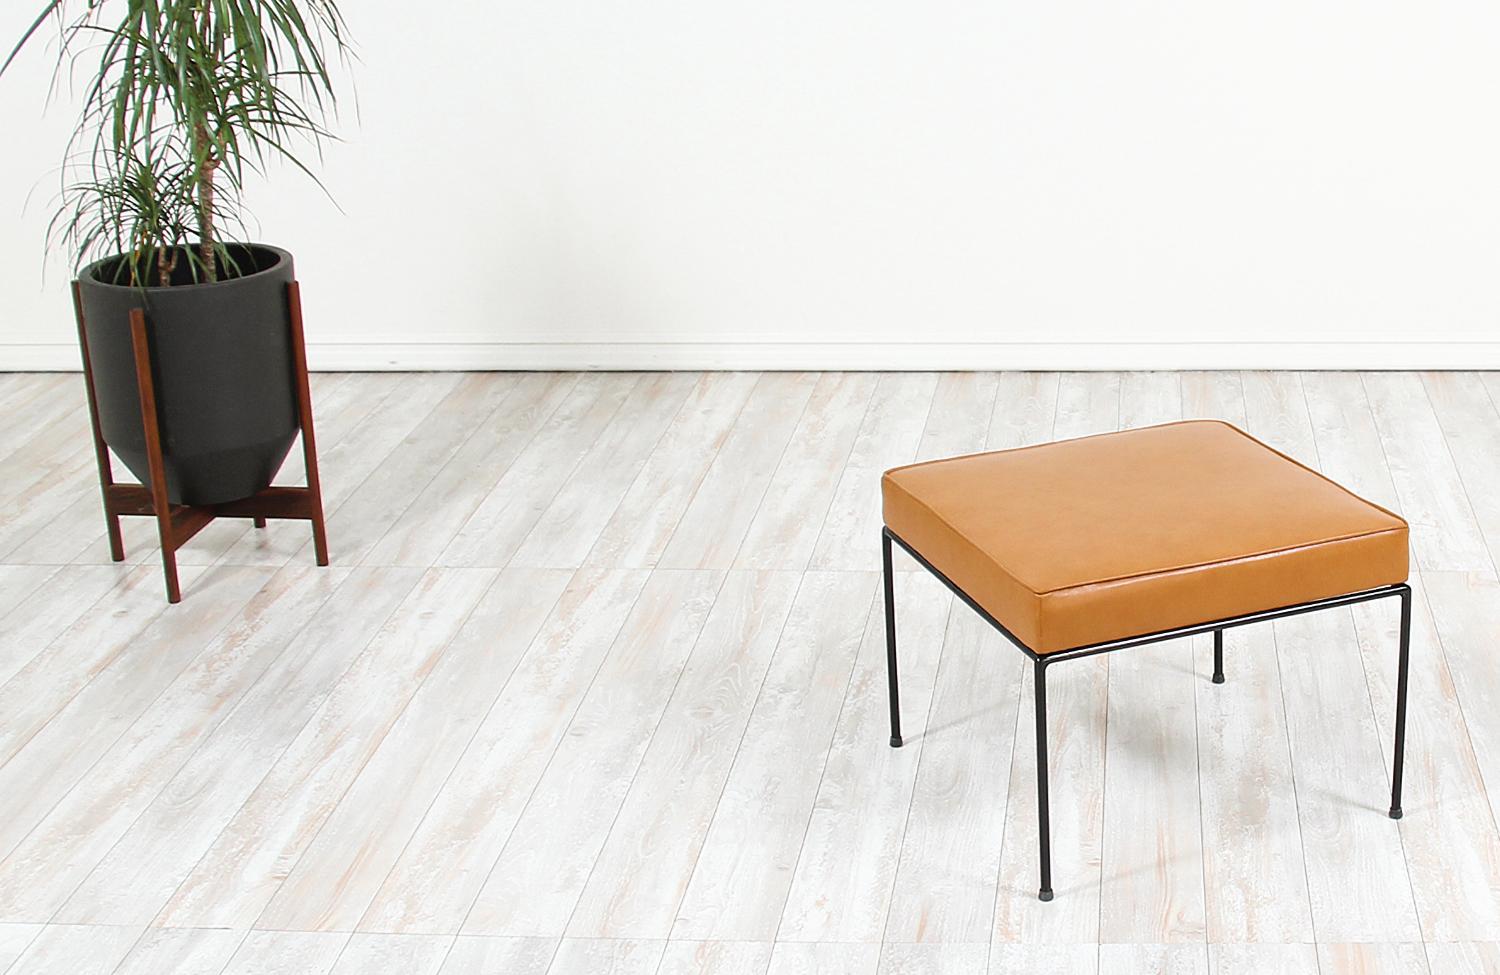 Beautiful modern stool designed by Paul McCobb for Custom craft, Inc. in the United States, circa 1950s. The iconic model no. 1305 stool is well known for its stability and excellent design that exemplifies the clean and Minimalist aesthetic of the